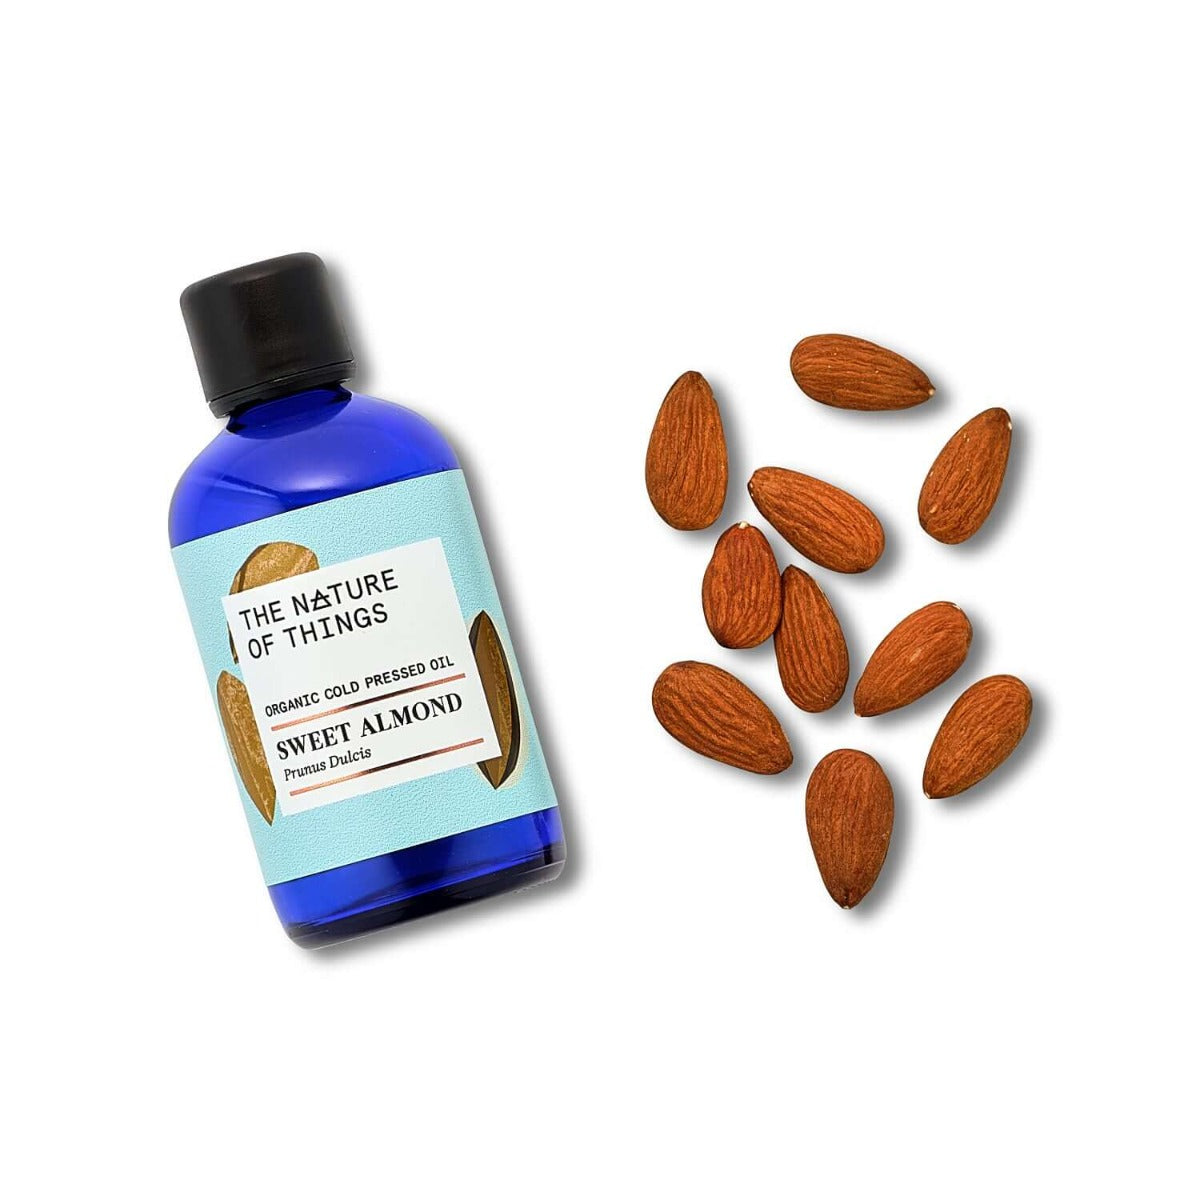 Organic Almond Oil from The Nature of Things